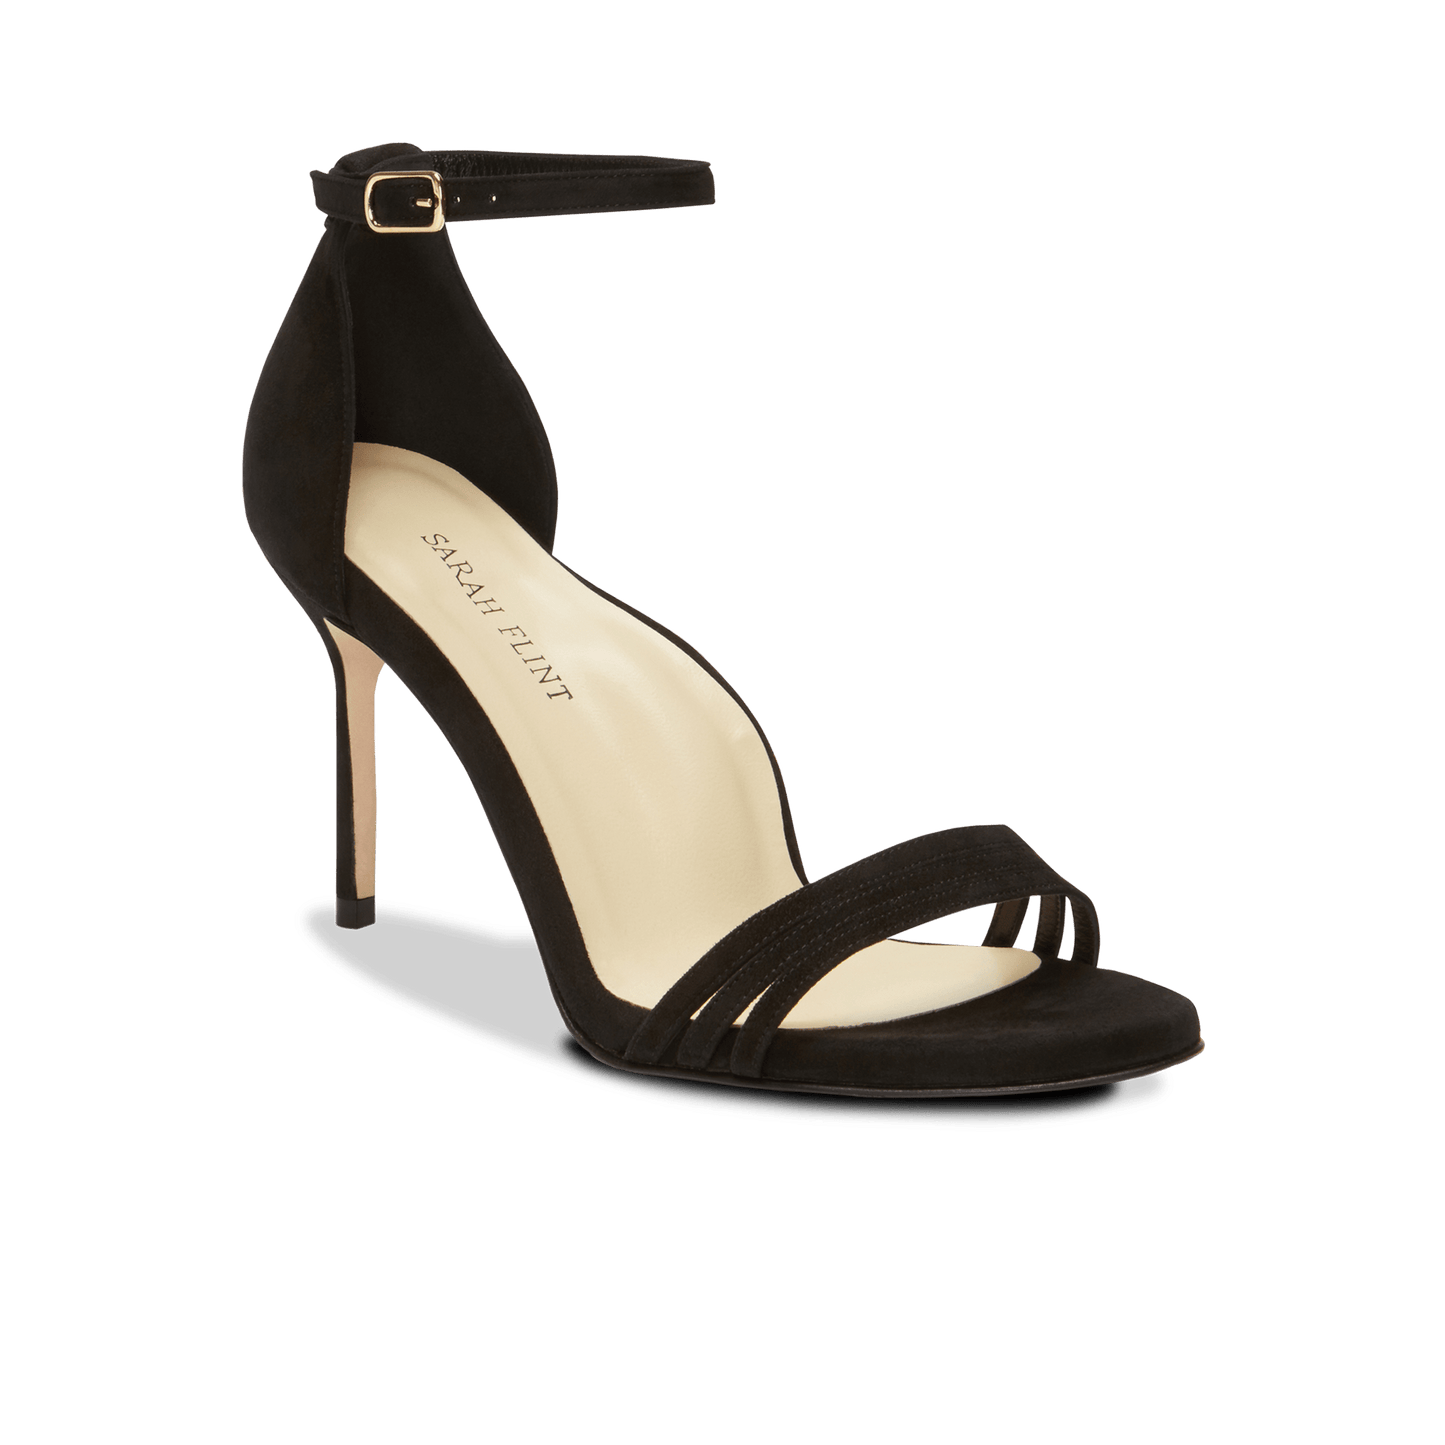 85mm Italian Made Round Toe Perfect Sandal in Black Suede